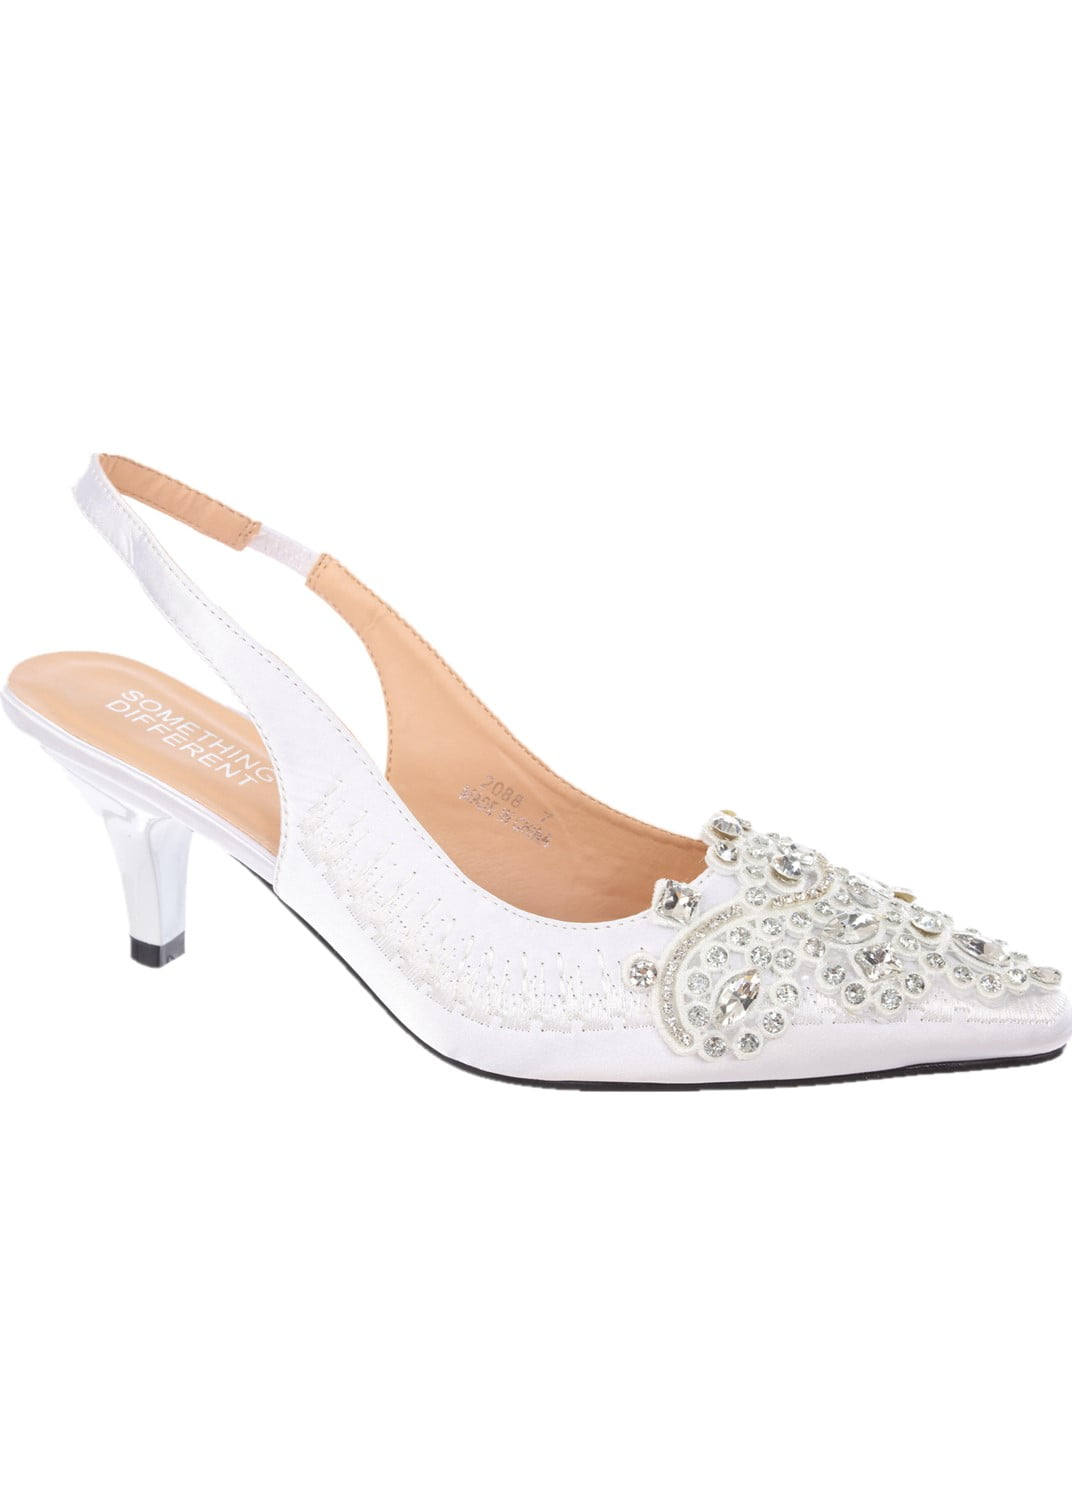 Buy White Heeled Shoes for Women by Everqupid Online | Ajio.com